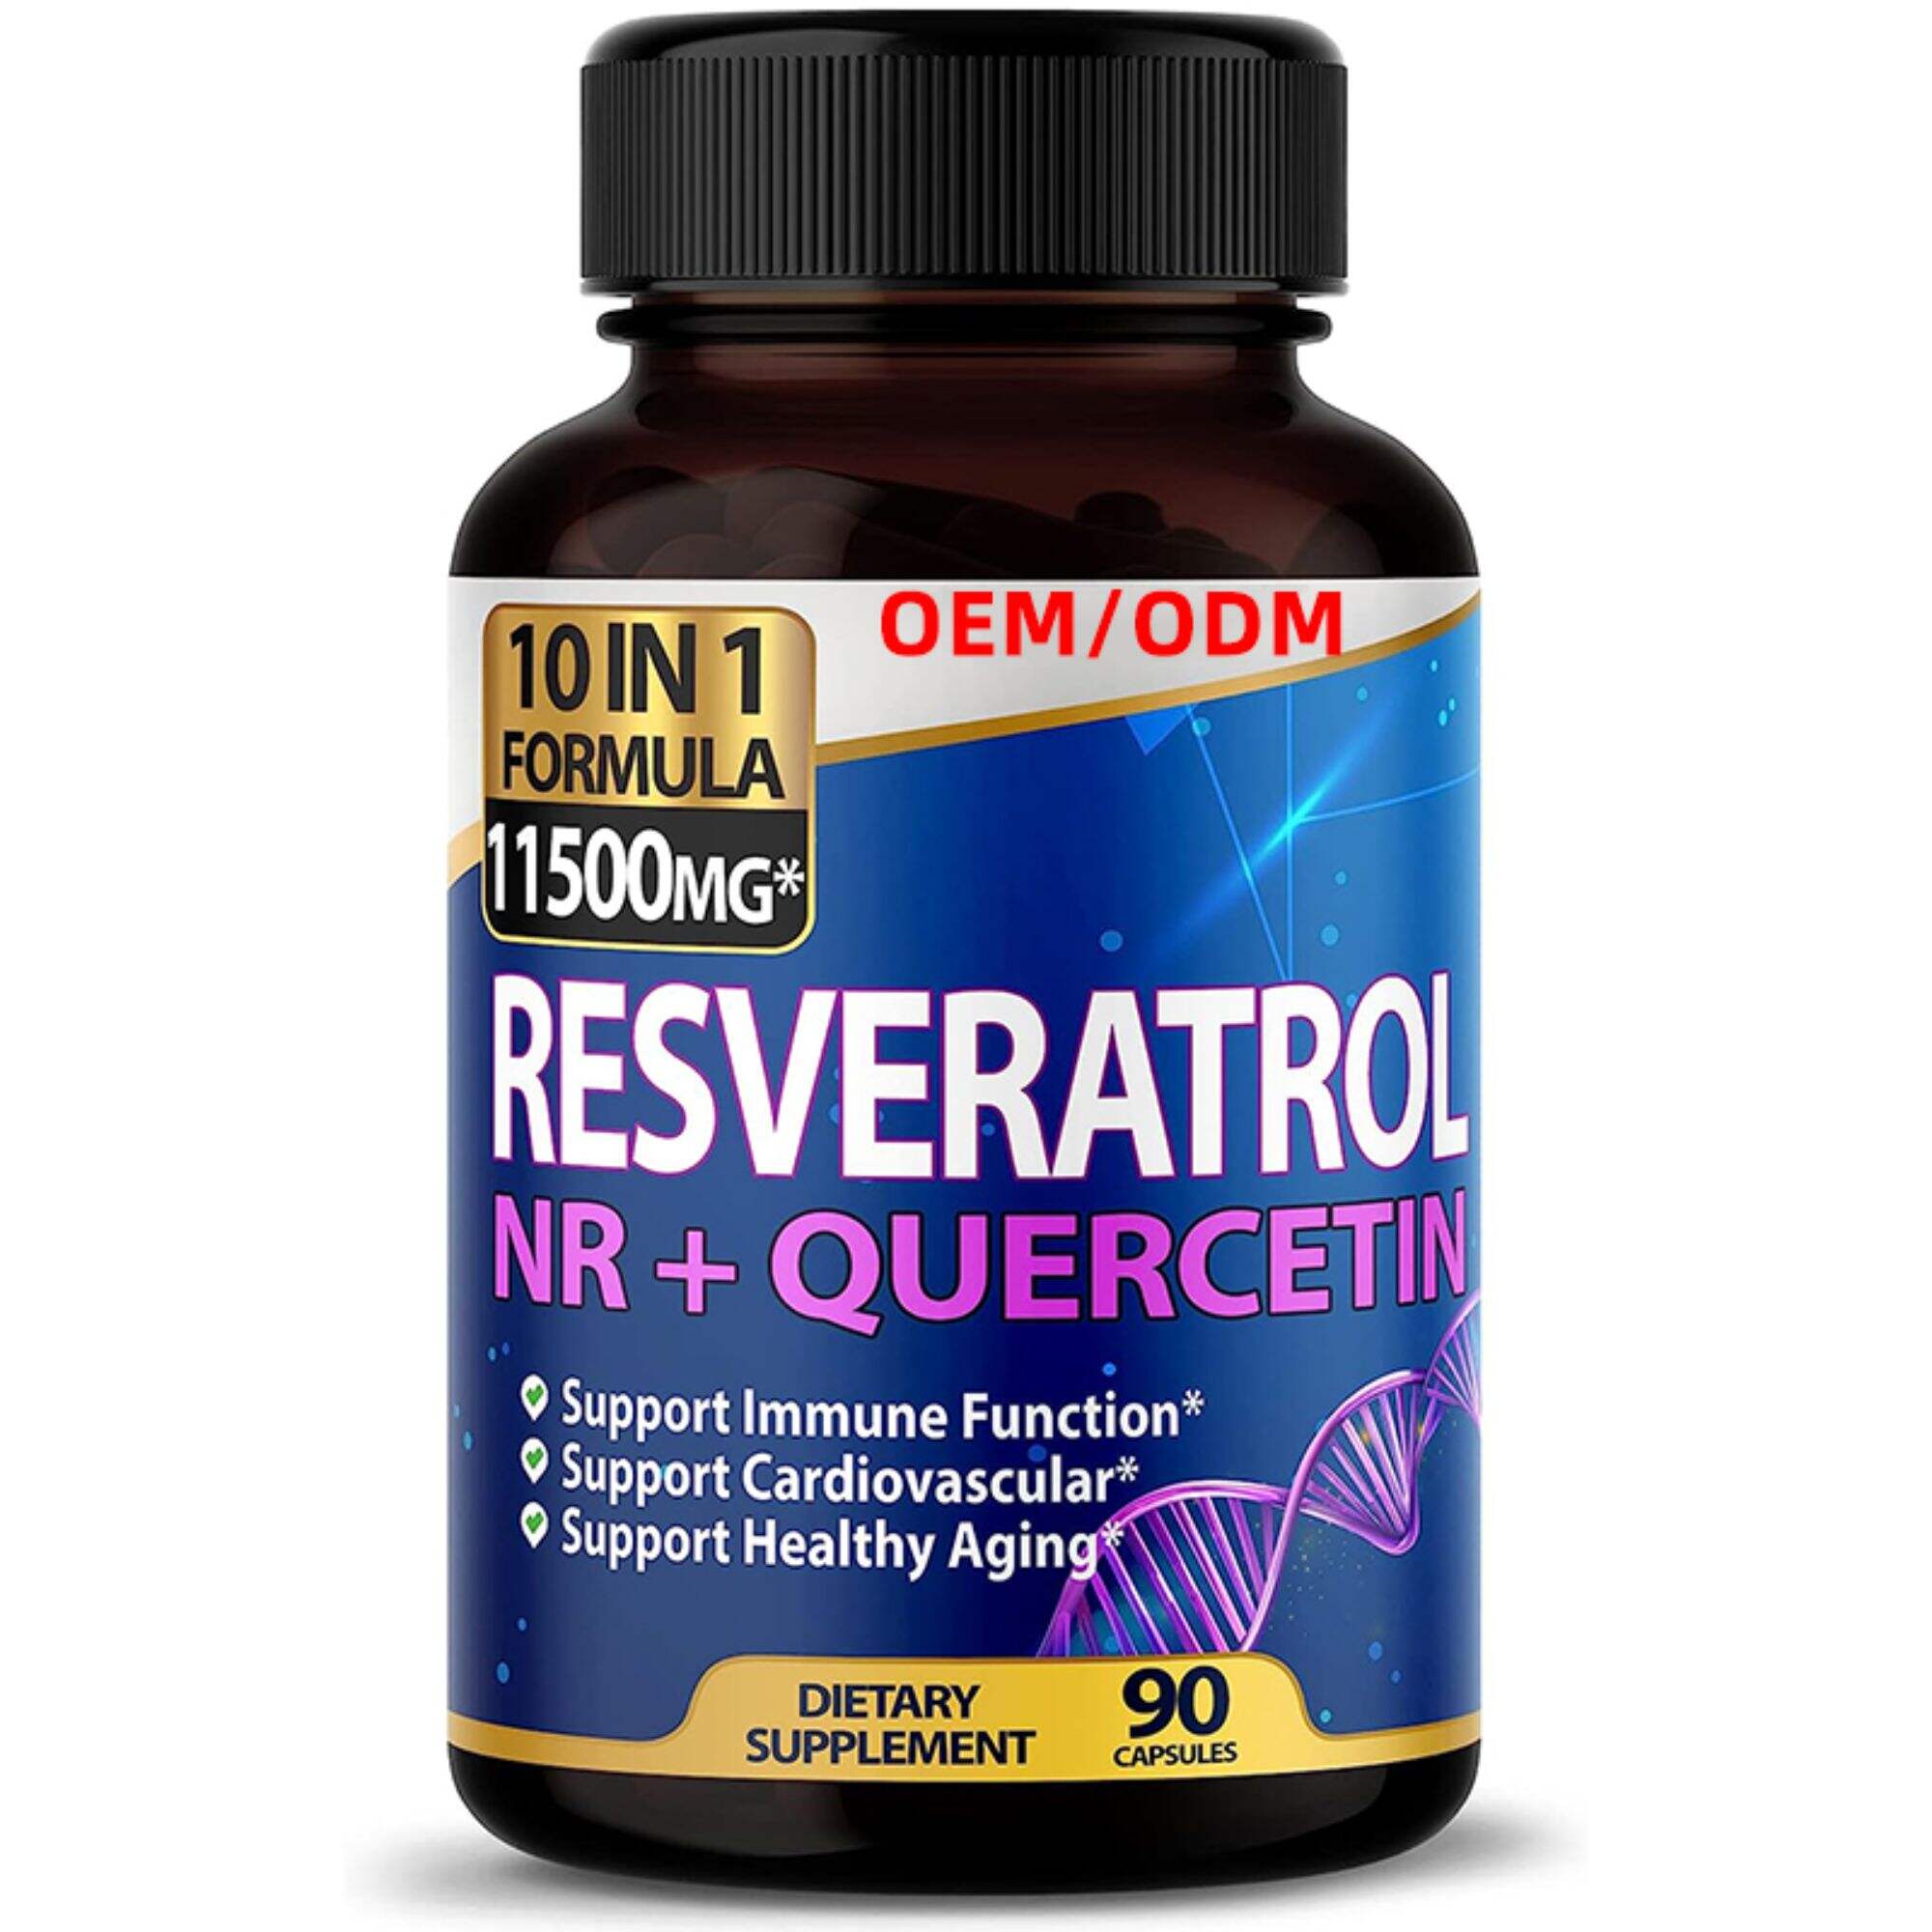 Resveratrol NR+Quercetin10 in 1 High Strength Resveratrol 11,500MG with Quercetin Healthy Aging Immune Brain Boost Joint Support (90 Count)